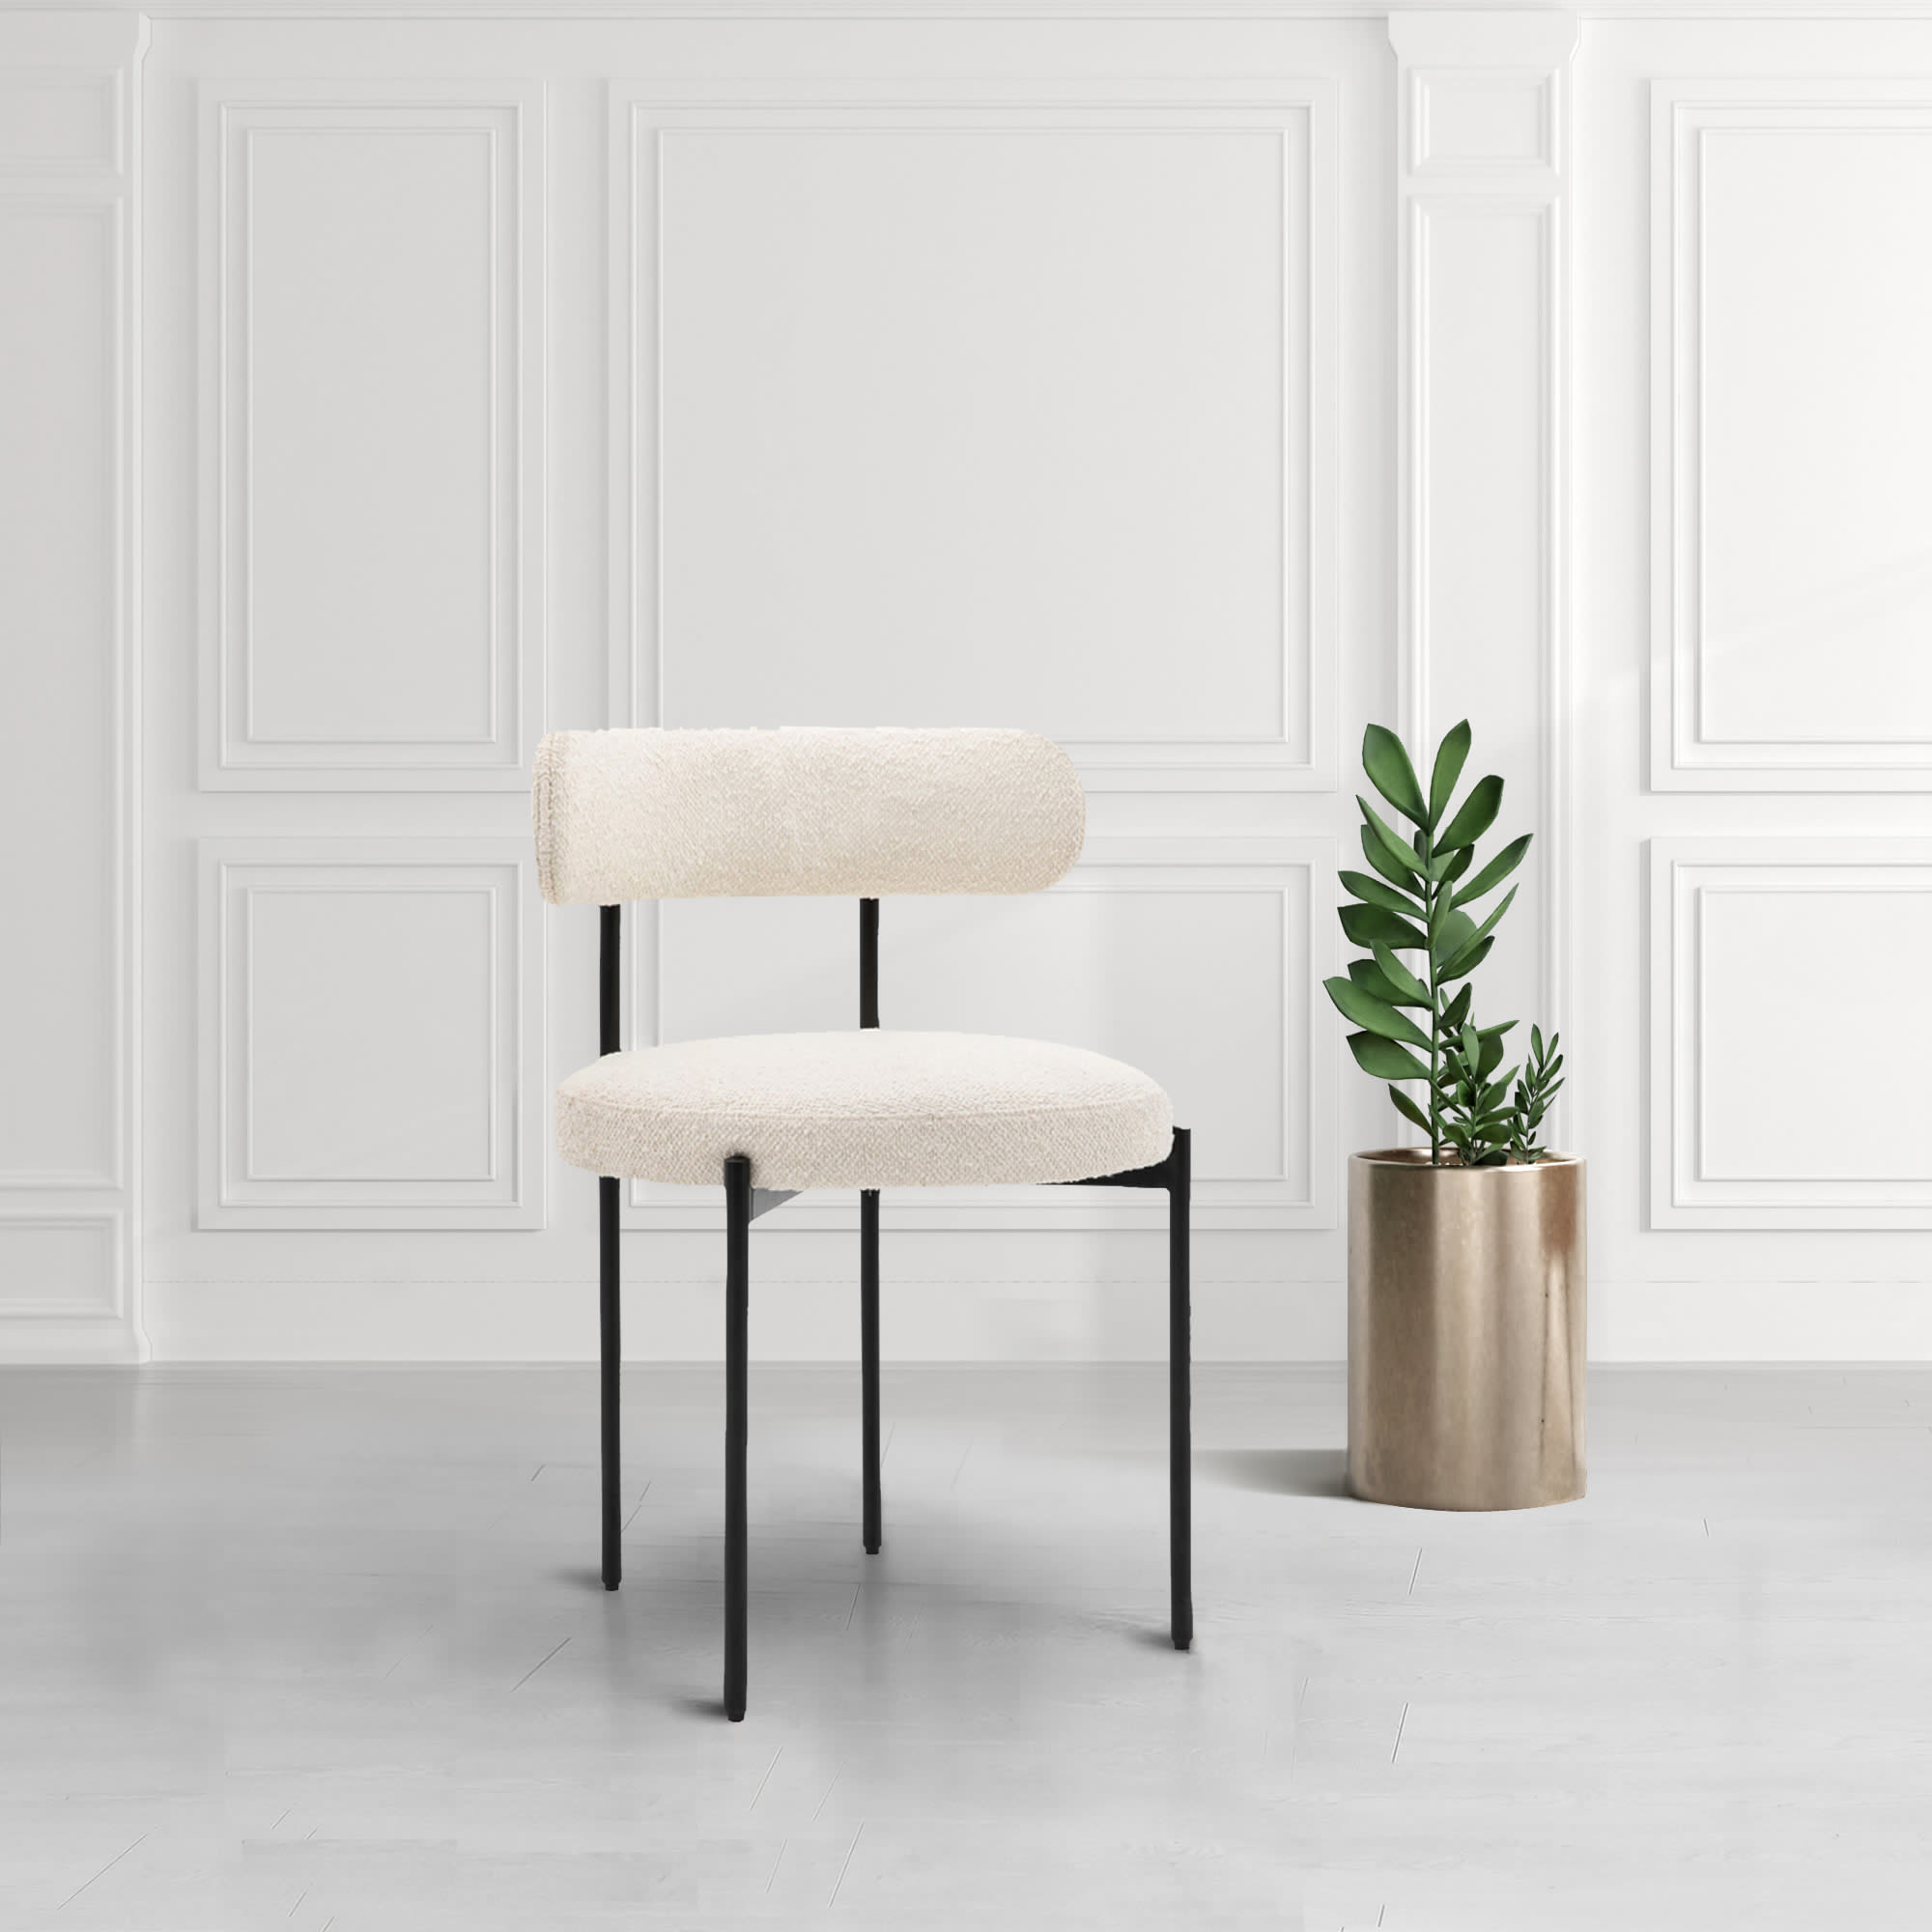 Aveley Cream Dining Chair by Gallery Direct